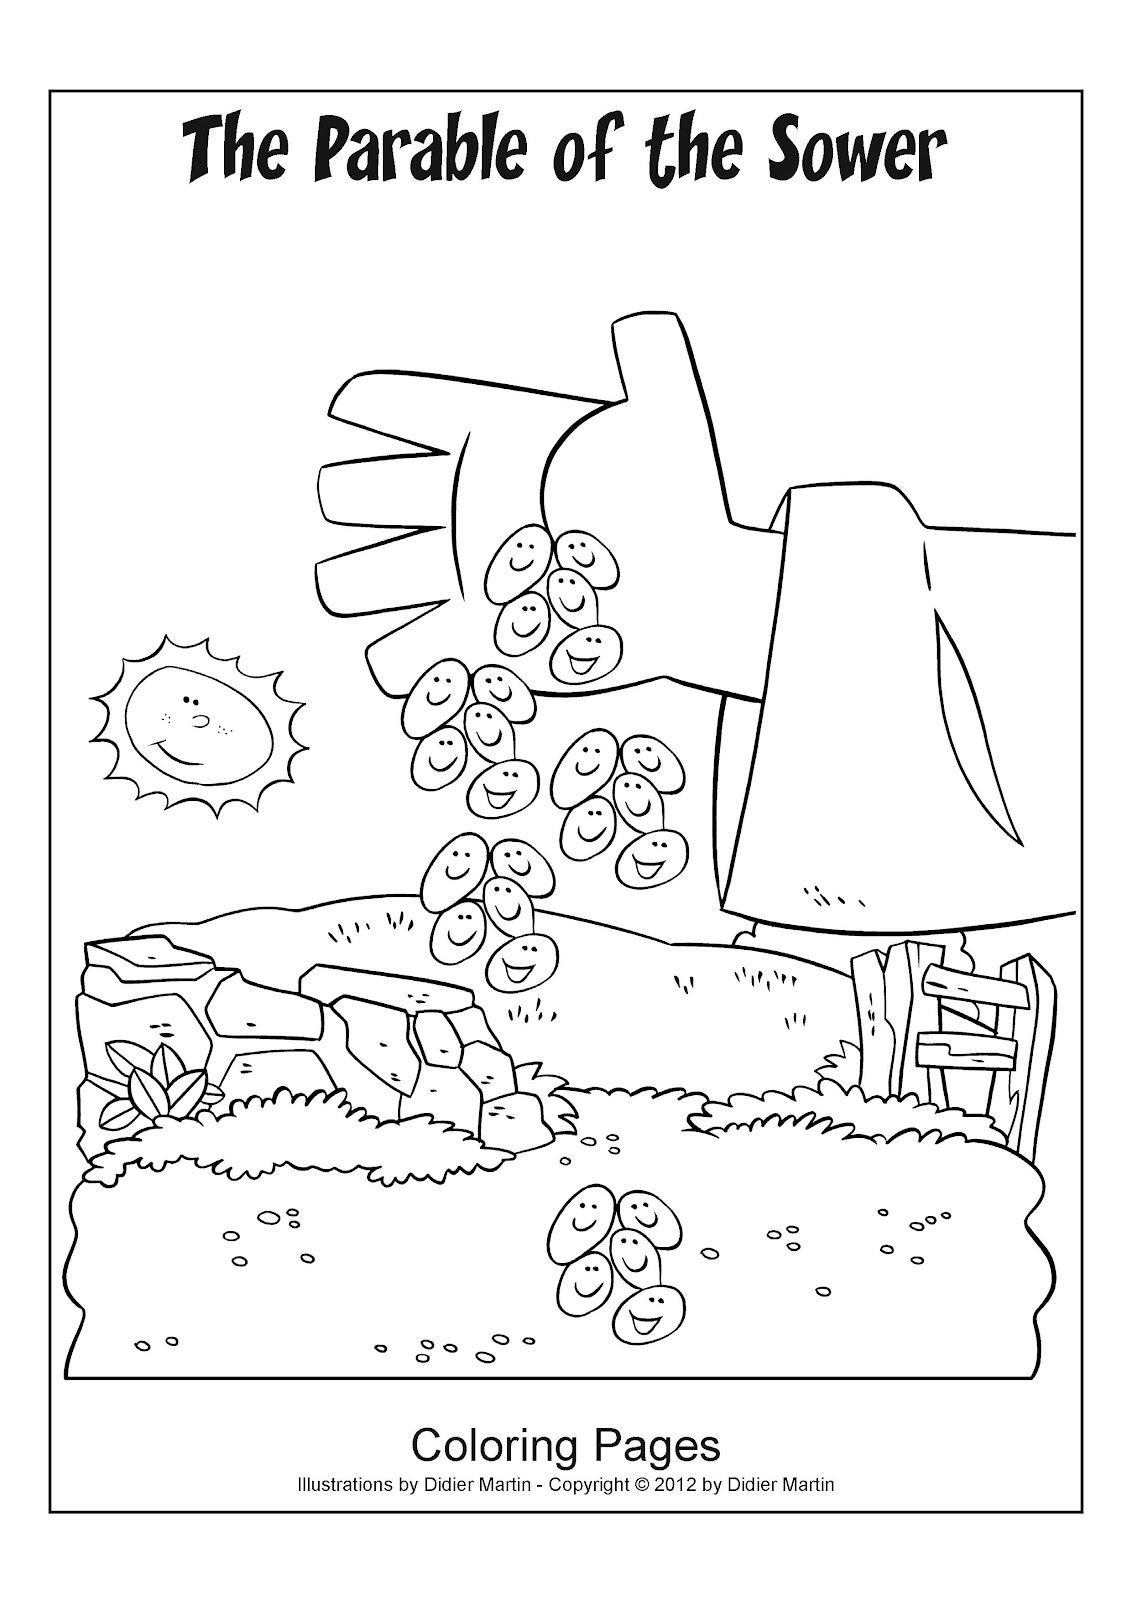 My Little House Bible Activity Pages The Parable Of The Sower Bible Activities Sunday School Coloring Pages Sunday School Activities